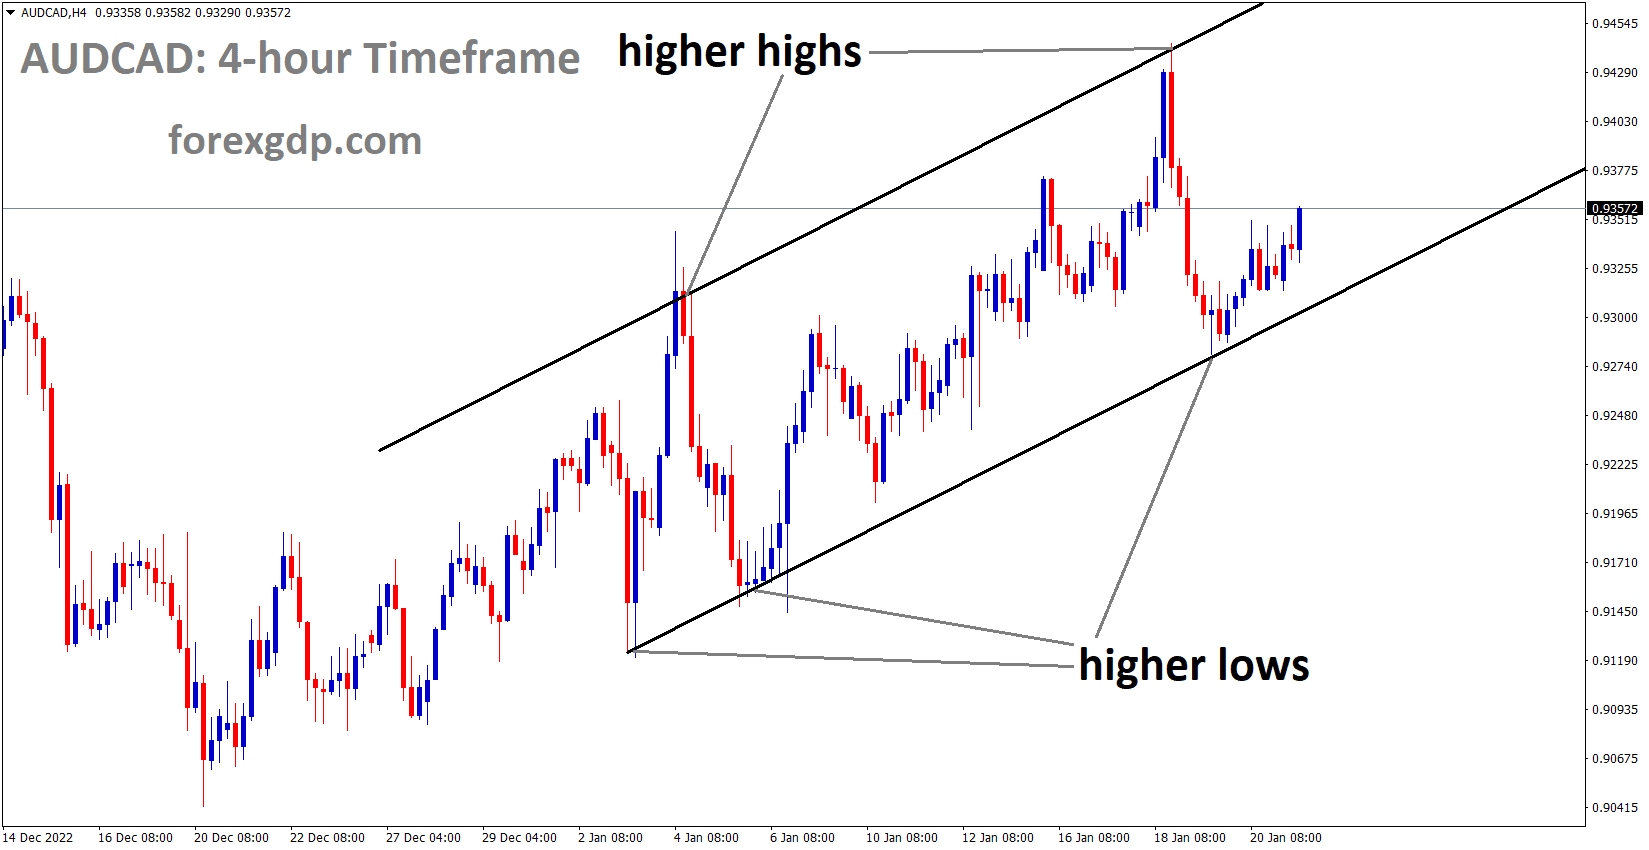 AUDCAD is moving in an Ascending channel and the market has rebounded from the higher low area of the channel 1